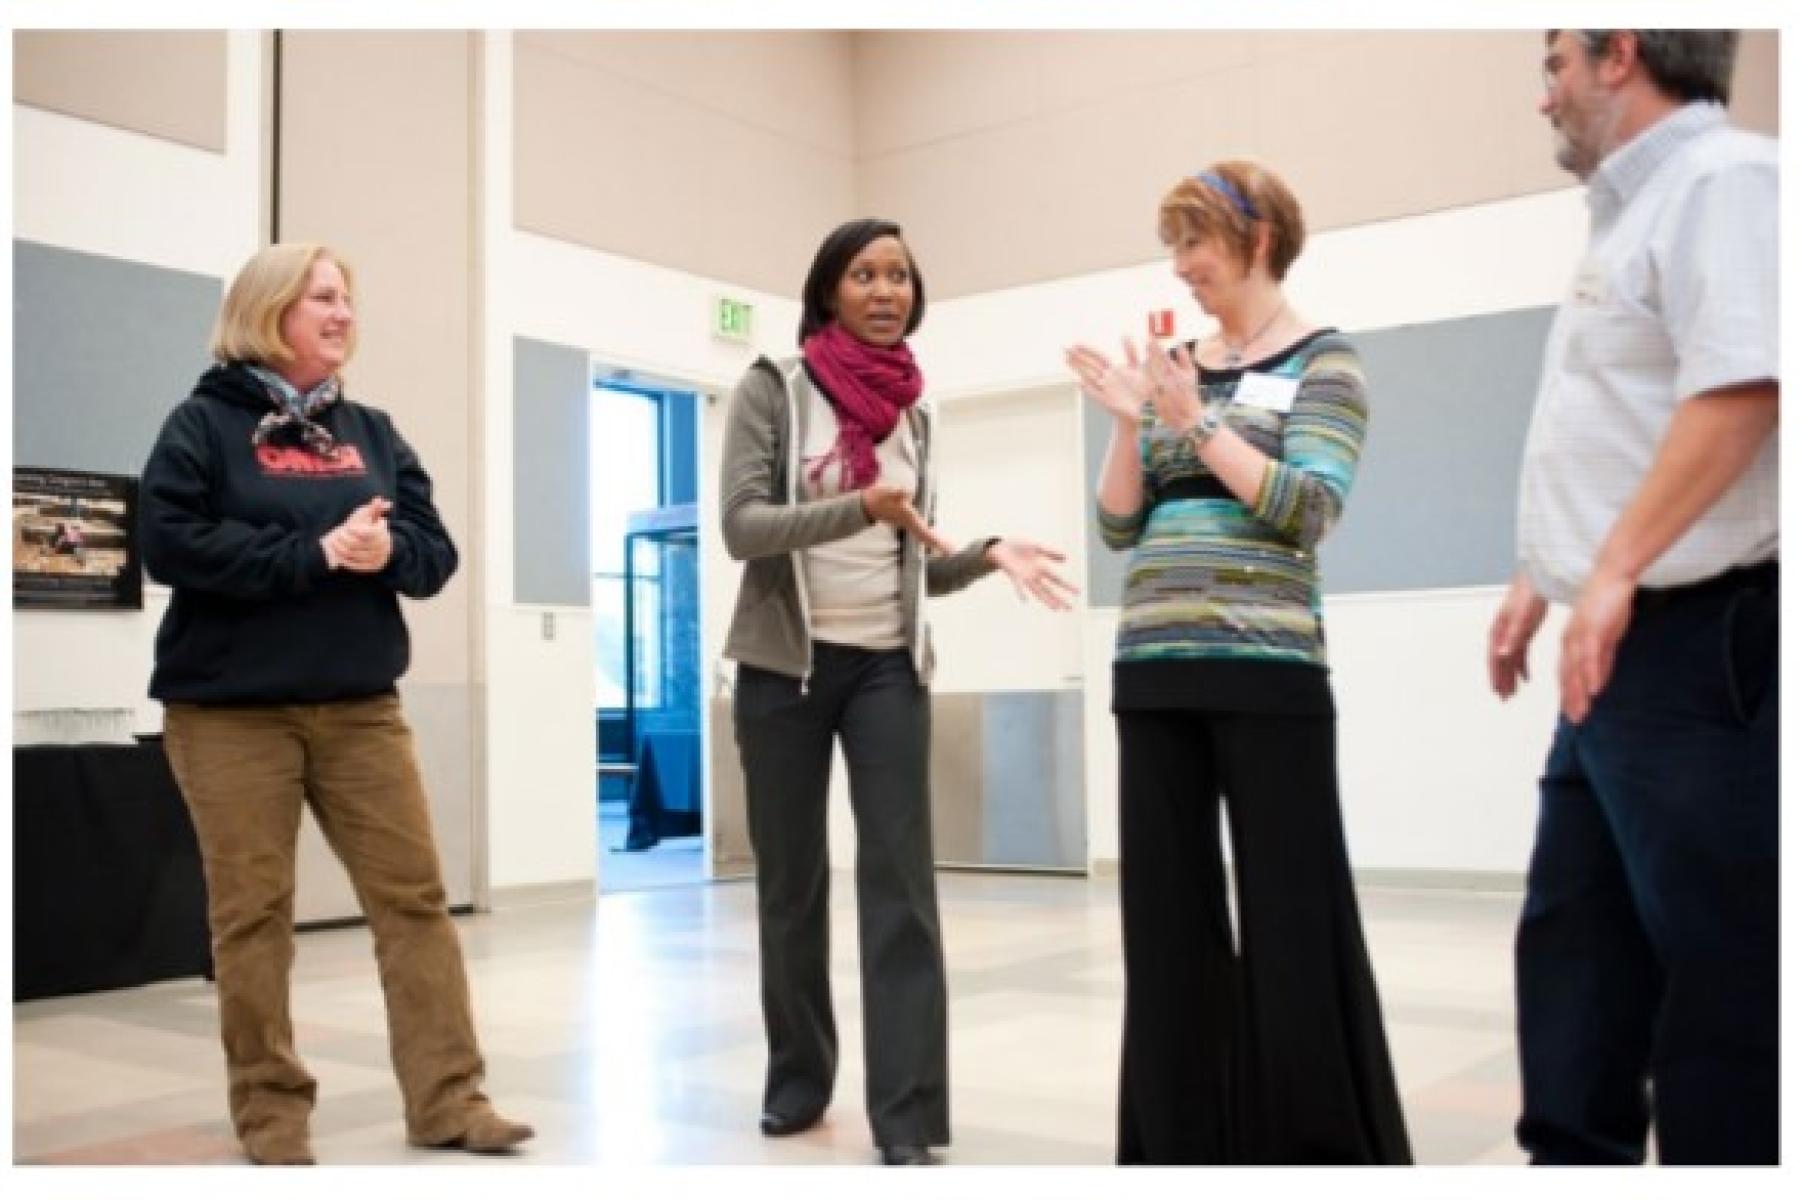 Three photos of professional museum educators participating in group training activities